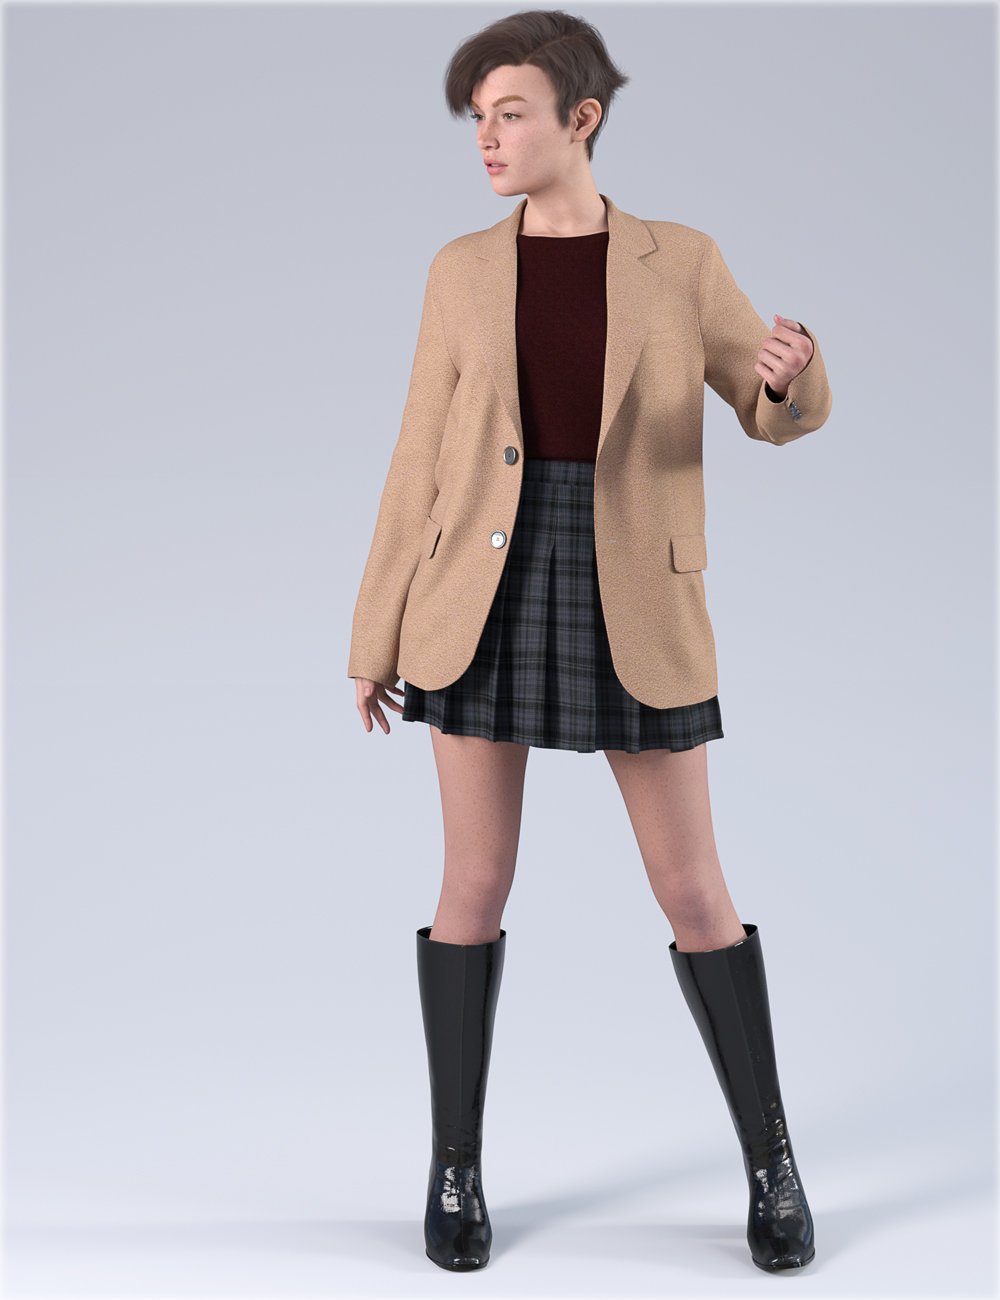 dForce HnC24 Casual Jacket Outfit for Genesis 9 by: IH Kang, 3D Models by Daz 3D